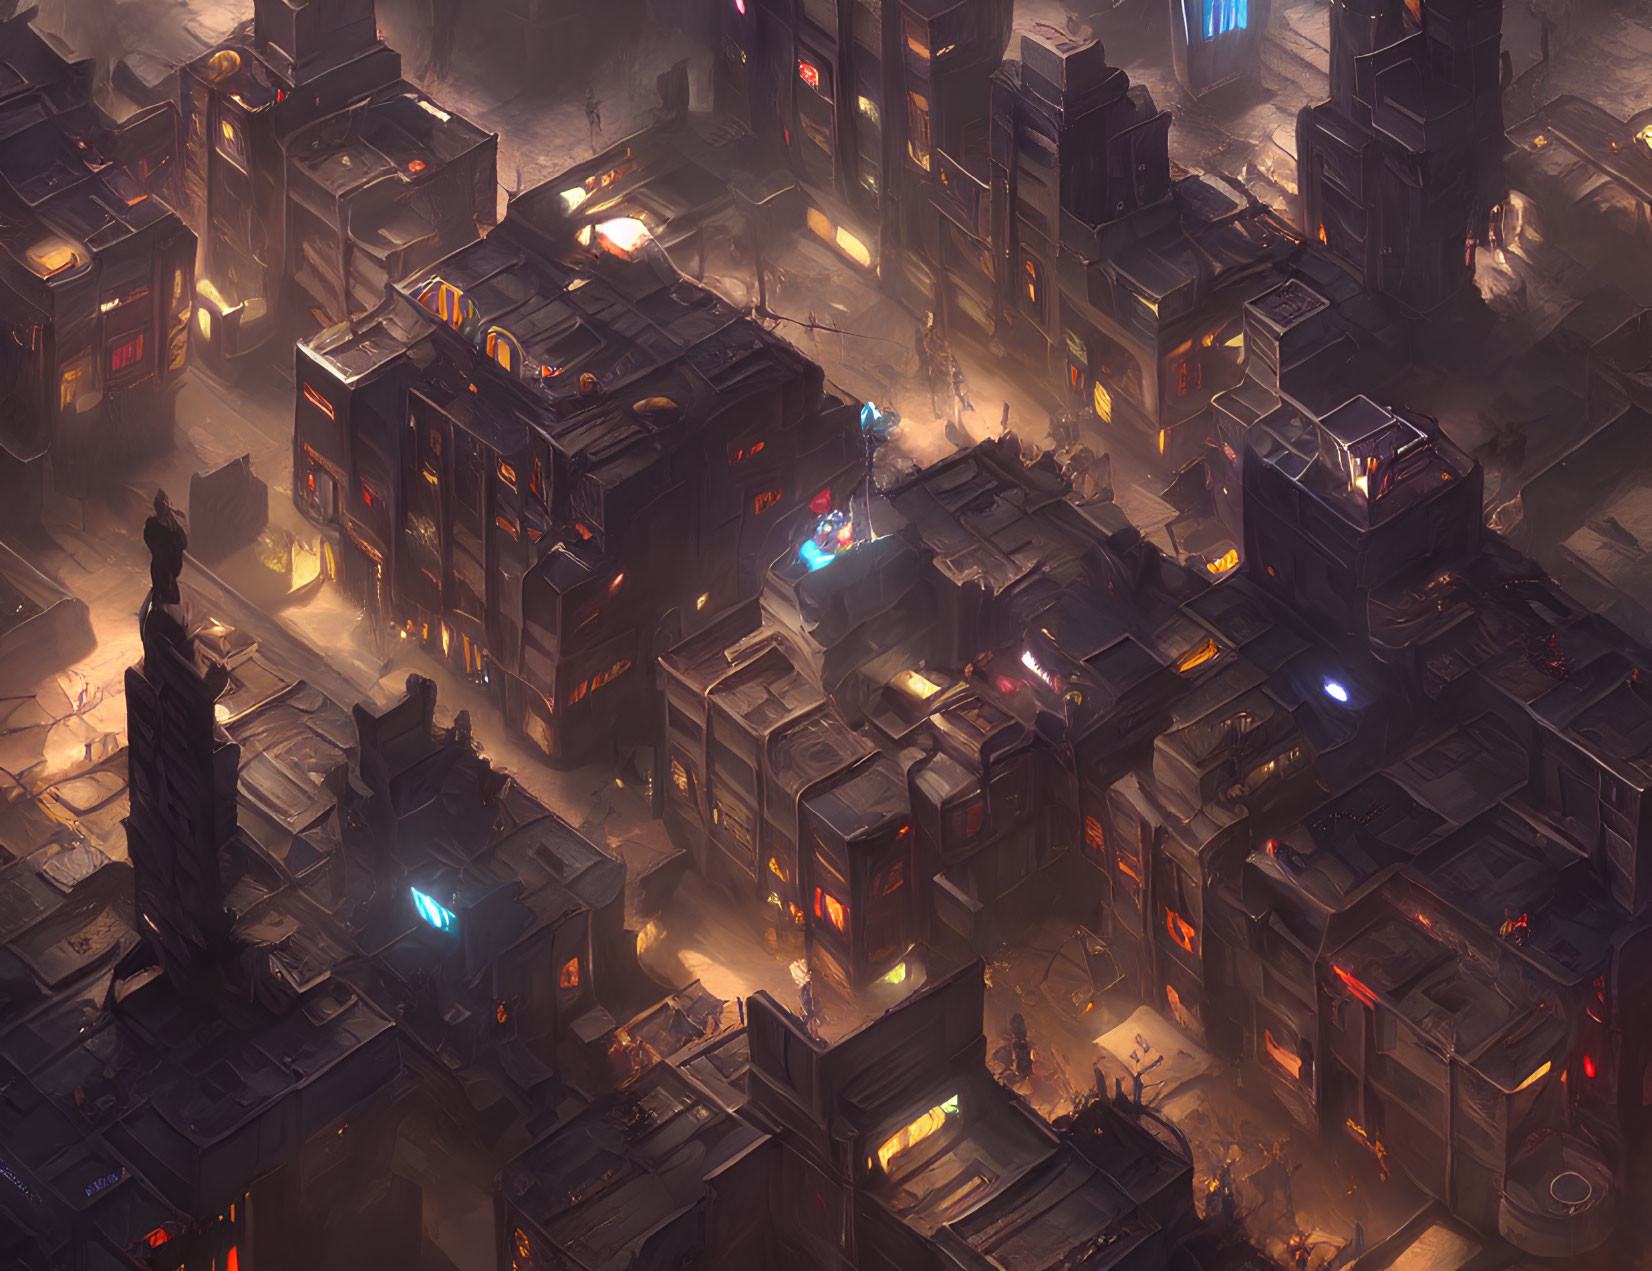 Futuristic cityscape at dusk: towering buildings, glowing windows, neon signs, and a prominent